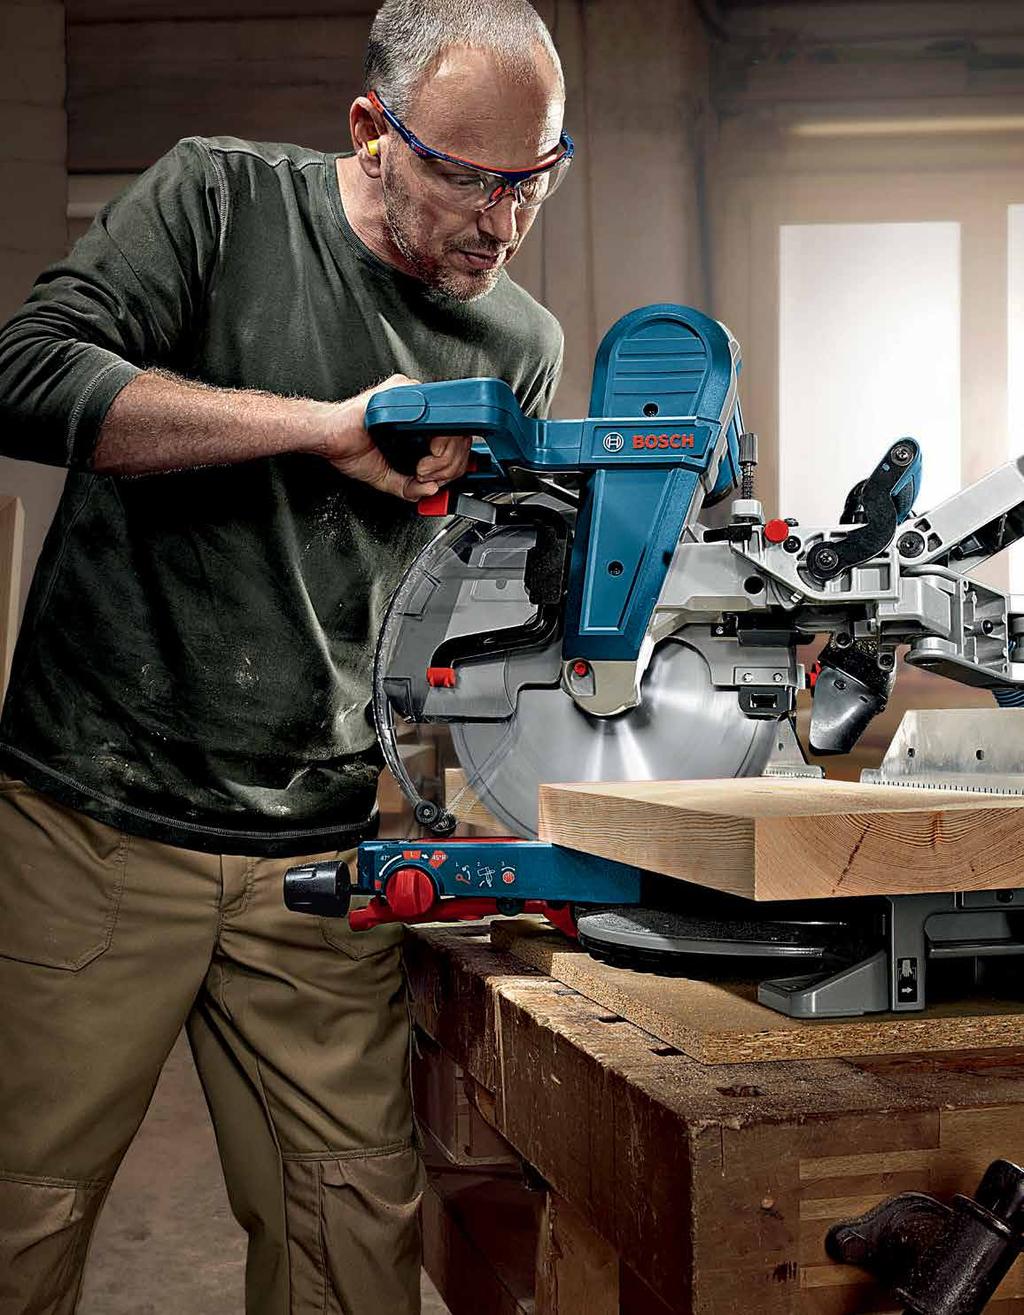 Benchtop Experts Table Saw + GTA 600 Table FREE GTS 10XC Professional } The versatile tool with a powerful 2100 watts } Powerful 2100-watt motor with motor brake, starting current